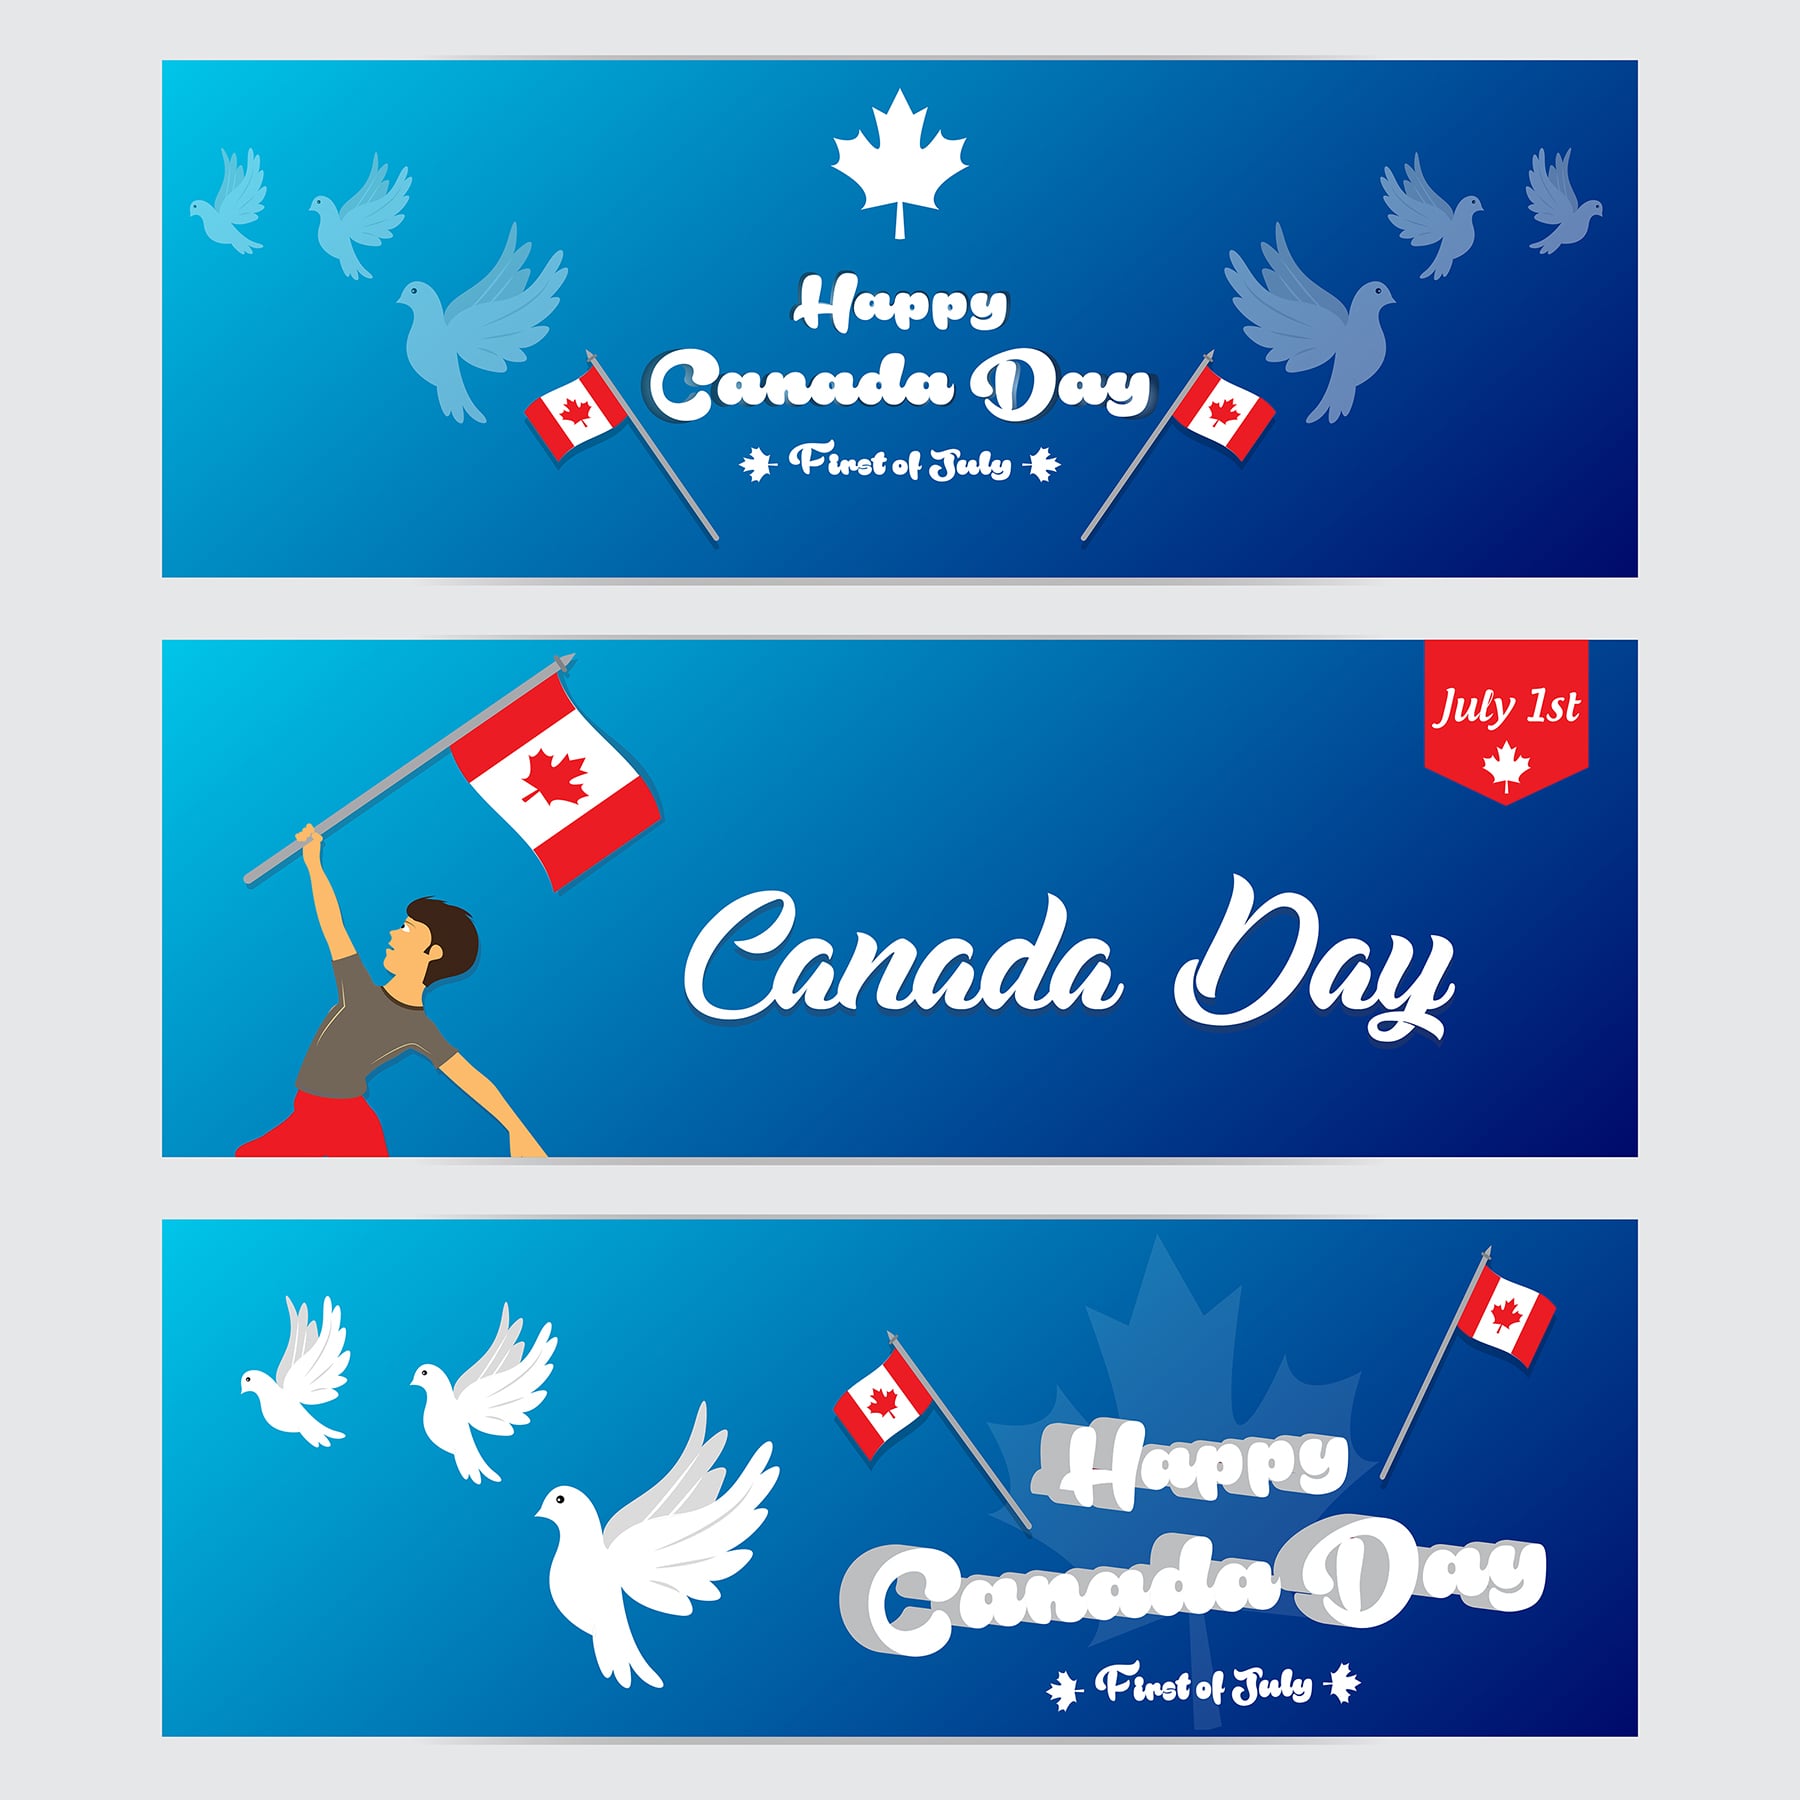 Happy Canada Day banner set free vector download